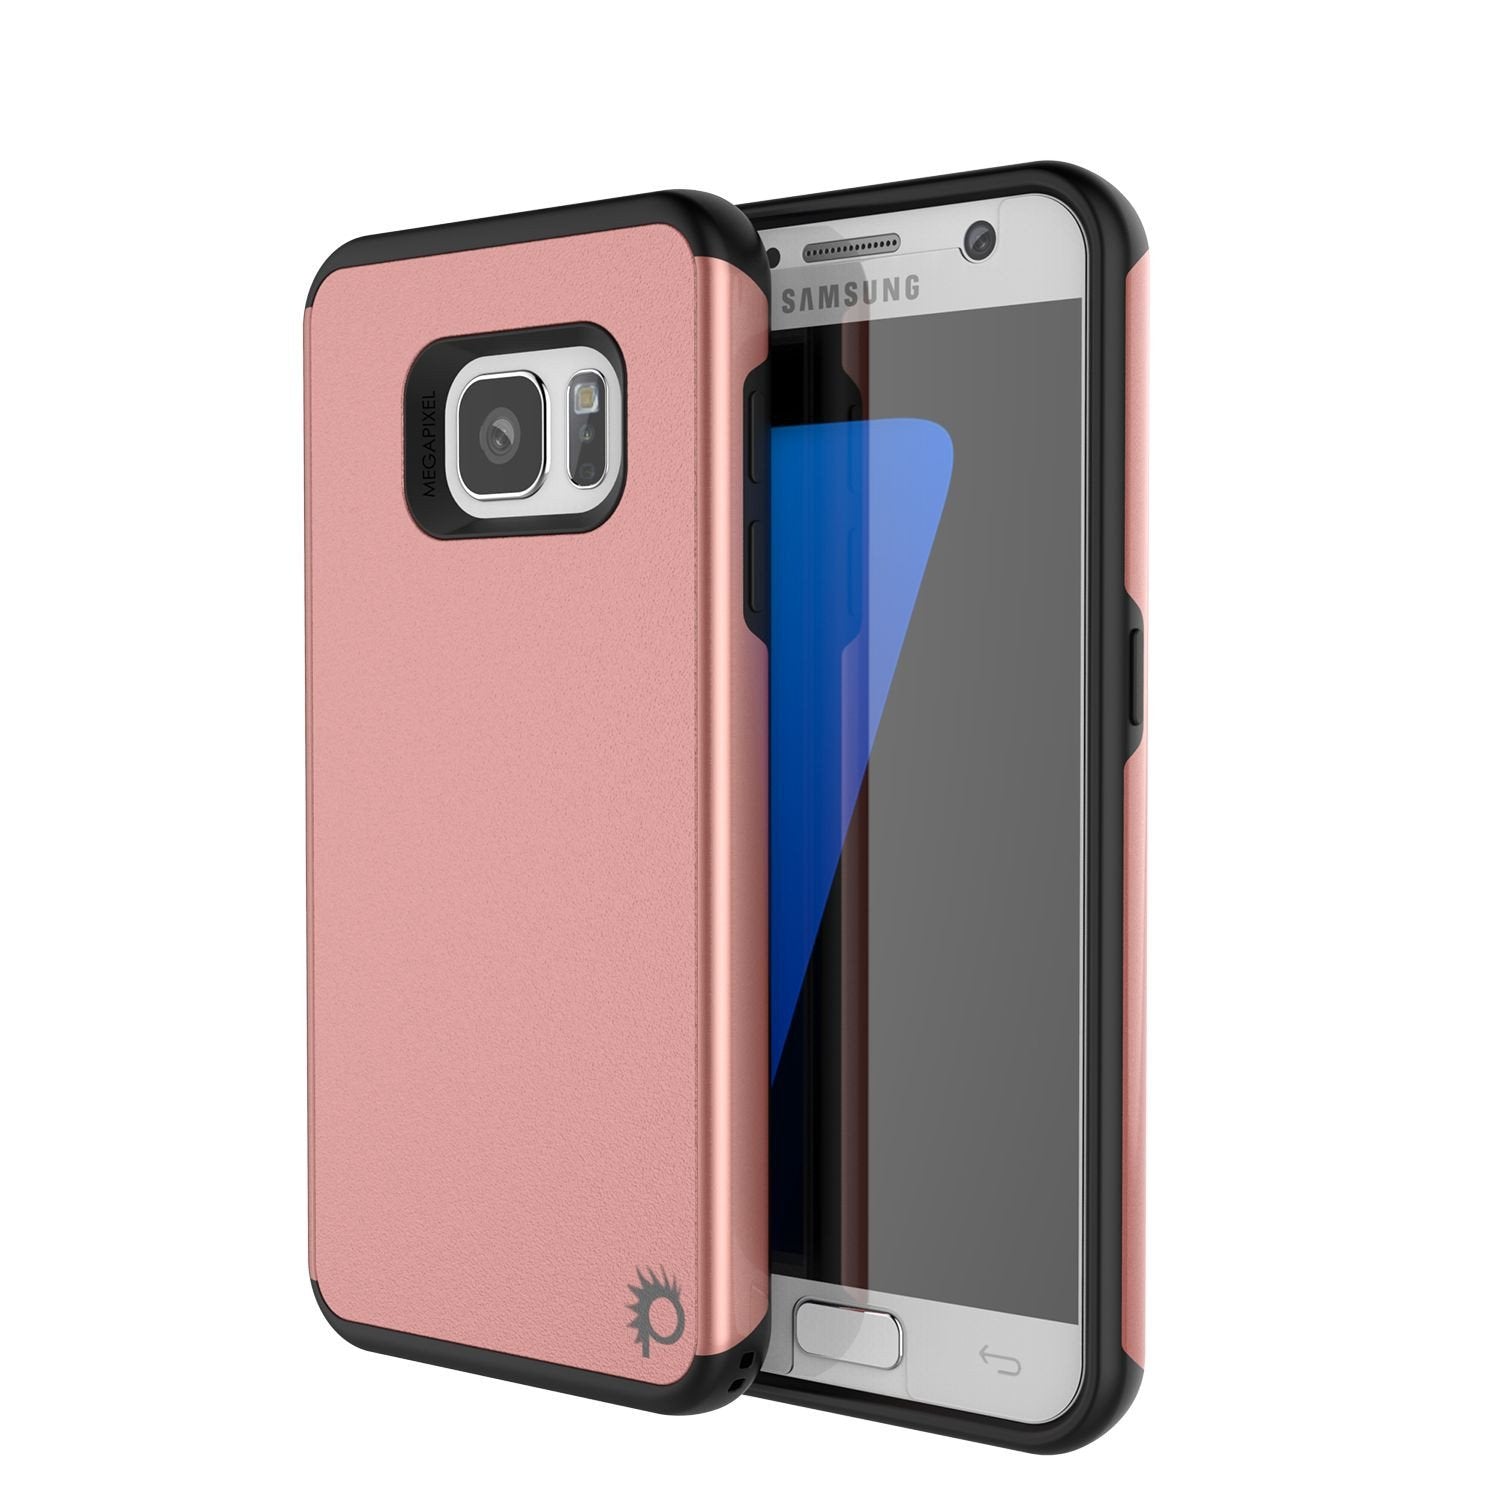 Galaxy s7 Case PunkCase Galactic Rose Gold Series Slim Armor Soft Cover Case w/ Tempered Glass